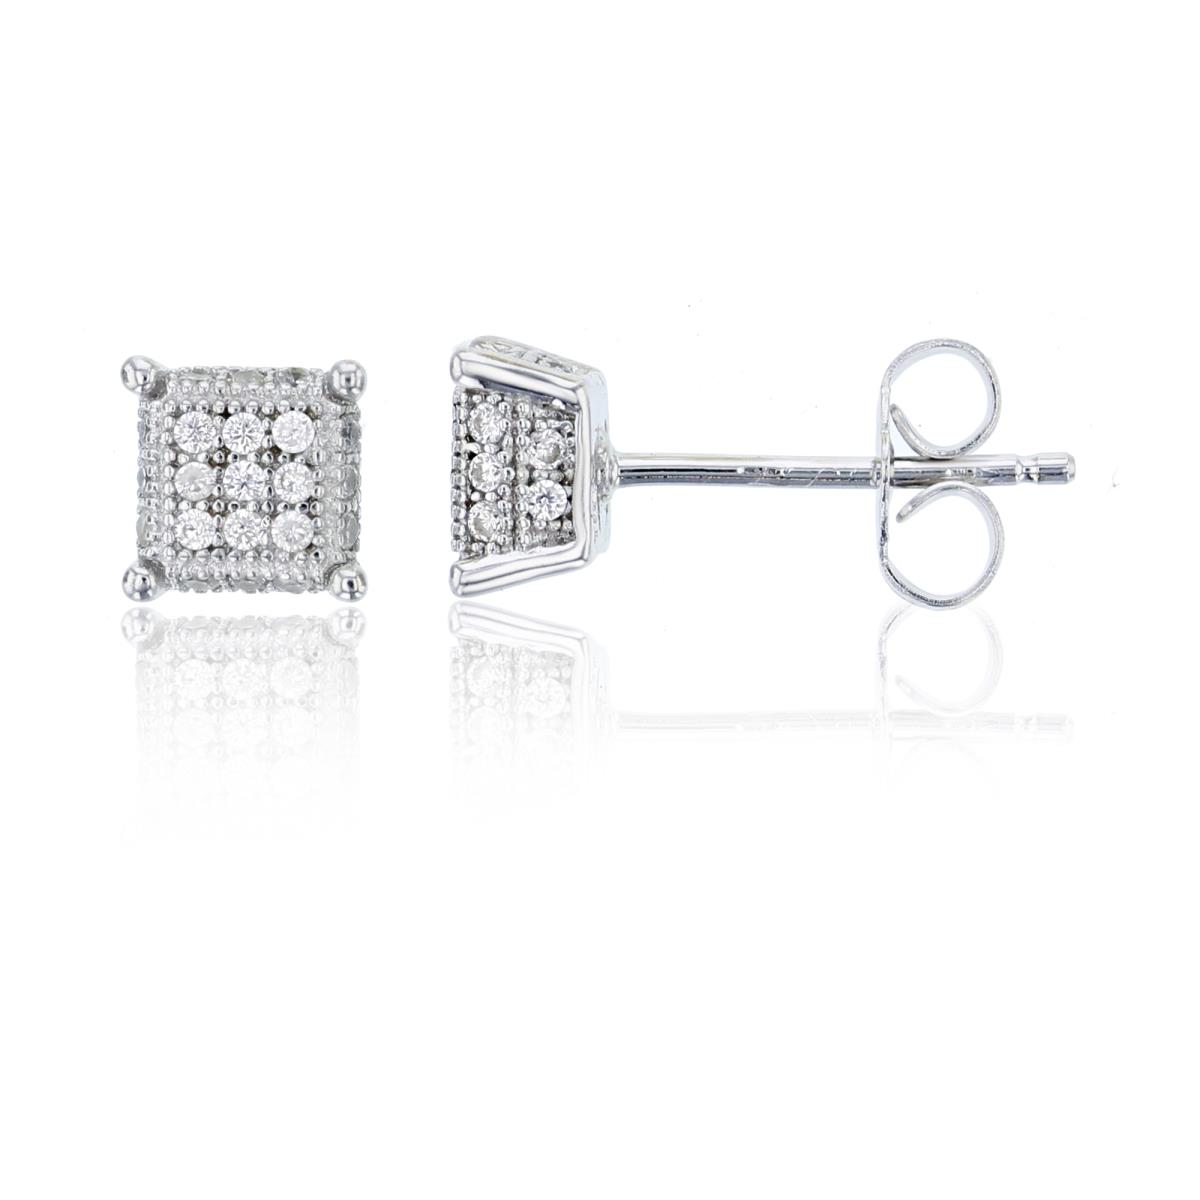 Sterling Silver 6.3x6.3mm Micropave 3D Square Stud Earring